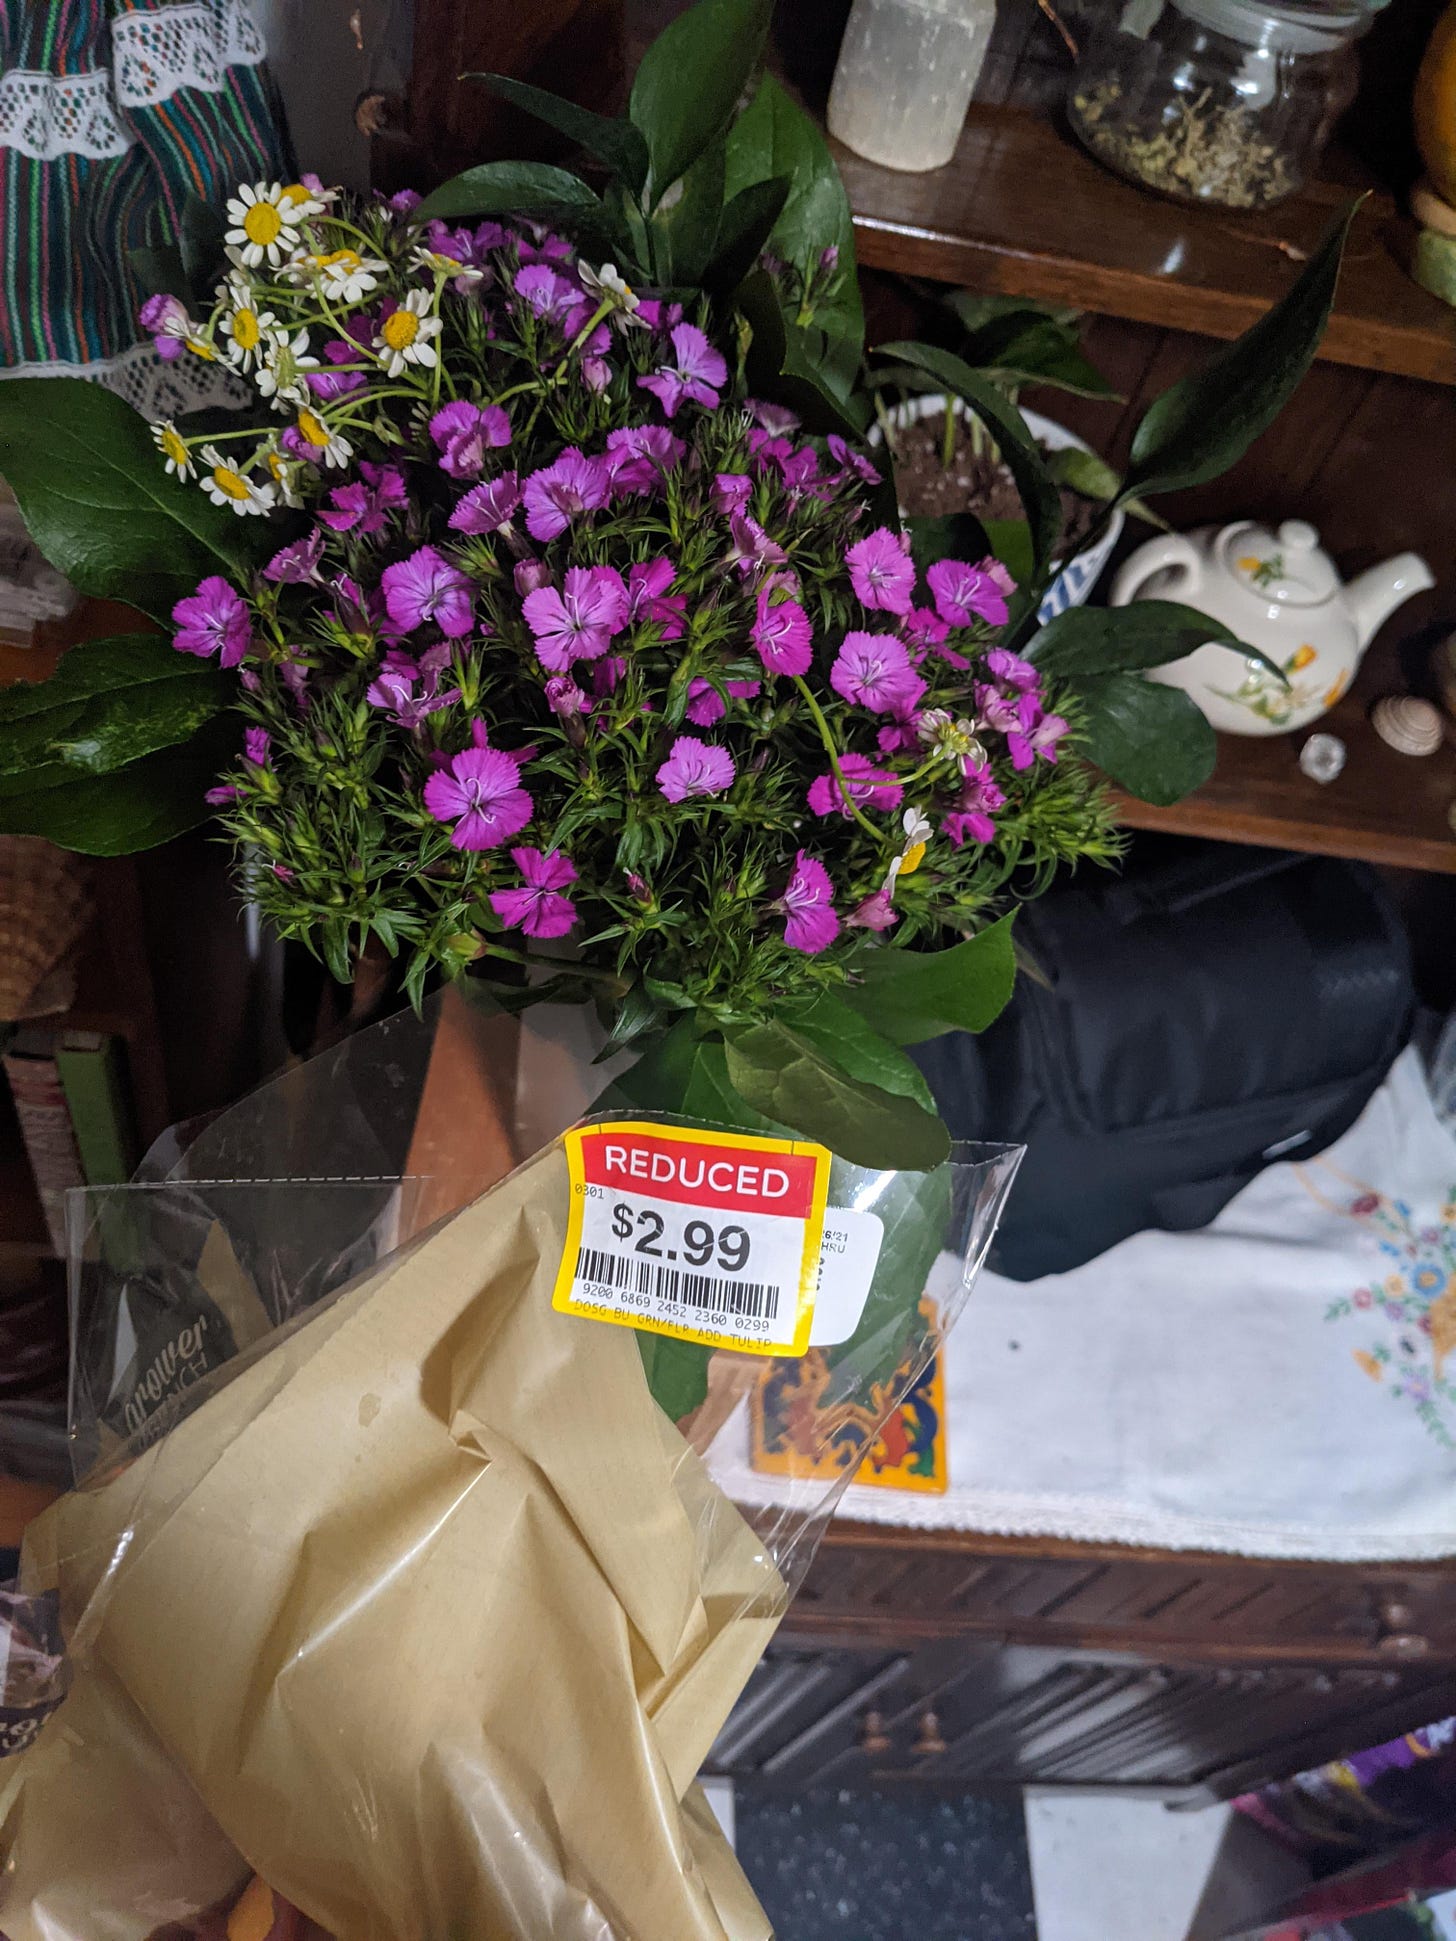 I discovered the Clearance/Reduced rack of flowers at my local grocery store.  I had no idea!! I bought these to thank my partner for their support. Such  a cheap little bouquet! :